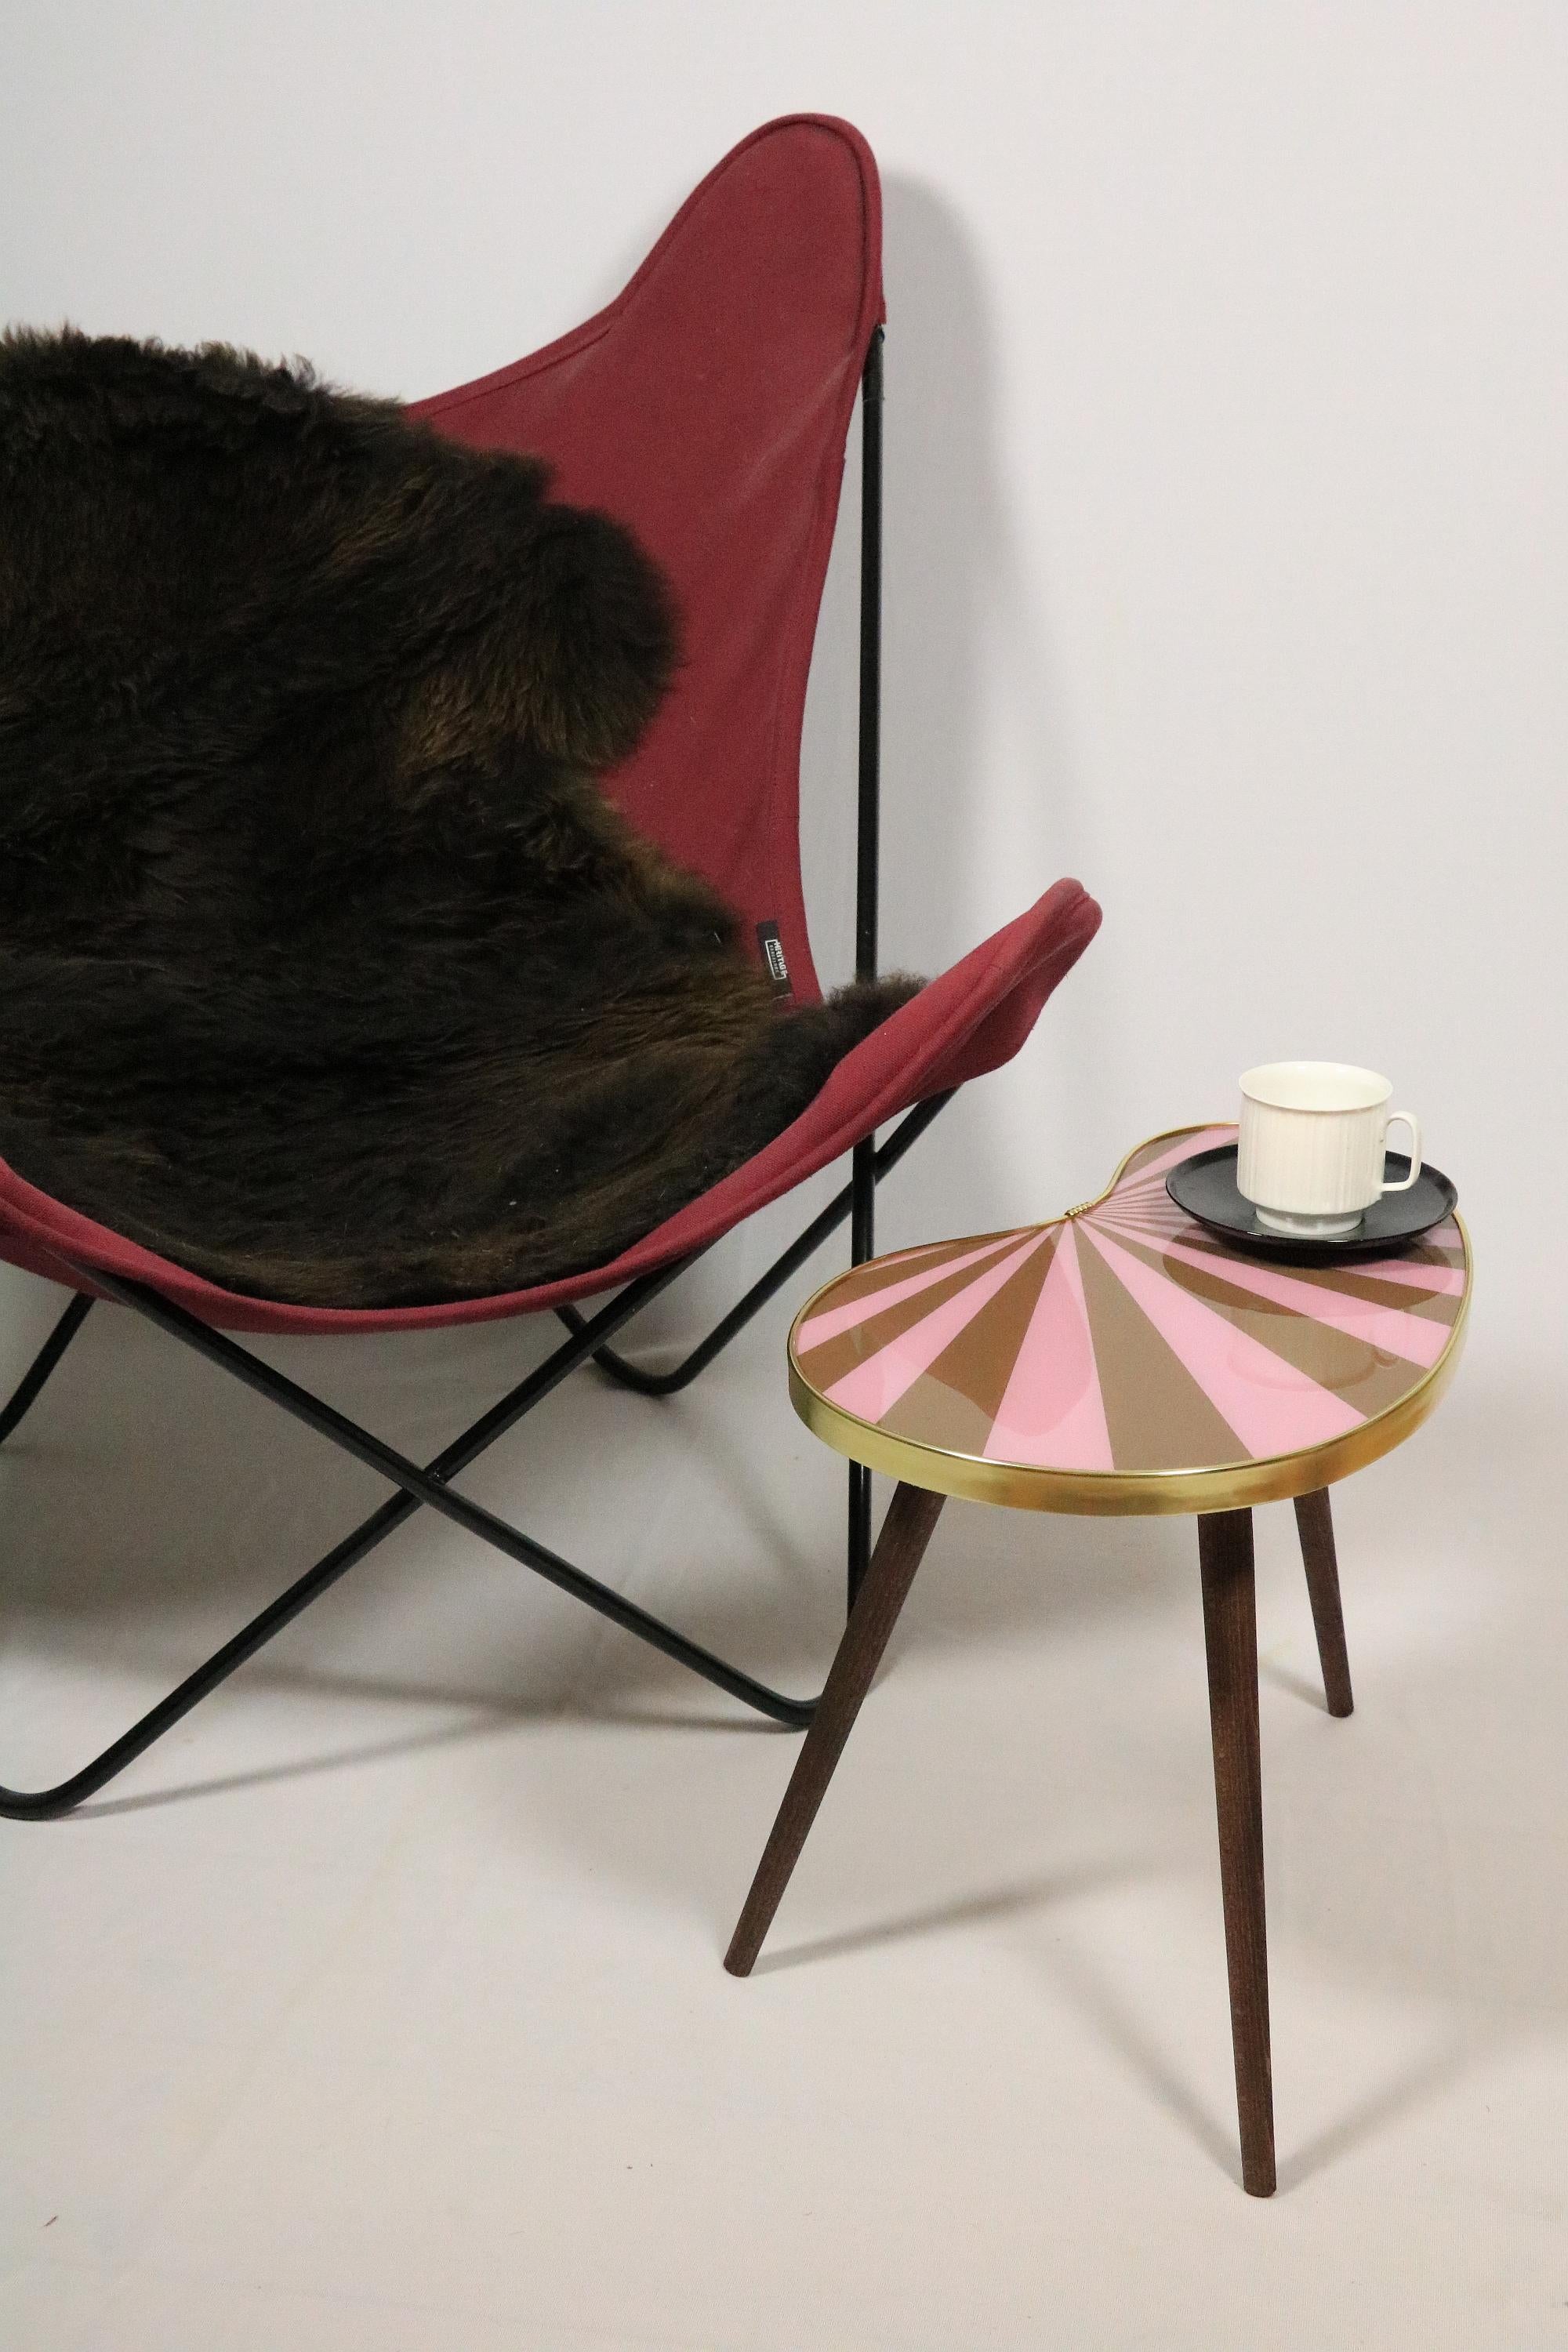 Small Side Table, Kidney Shaped, Pink-Taupe Stripes, 3 Elegant Legs, 50s Style For Sale 3